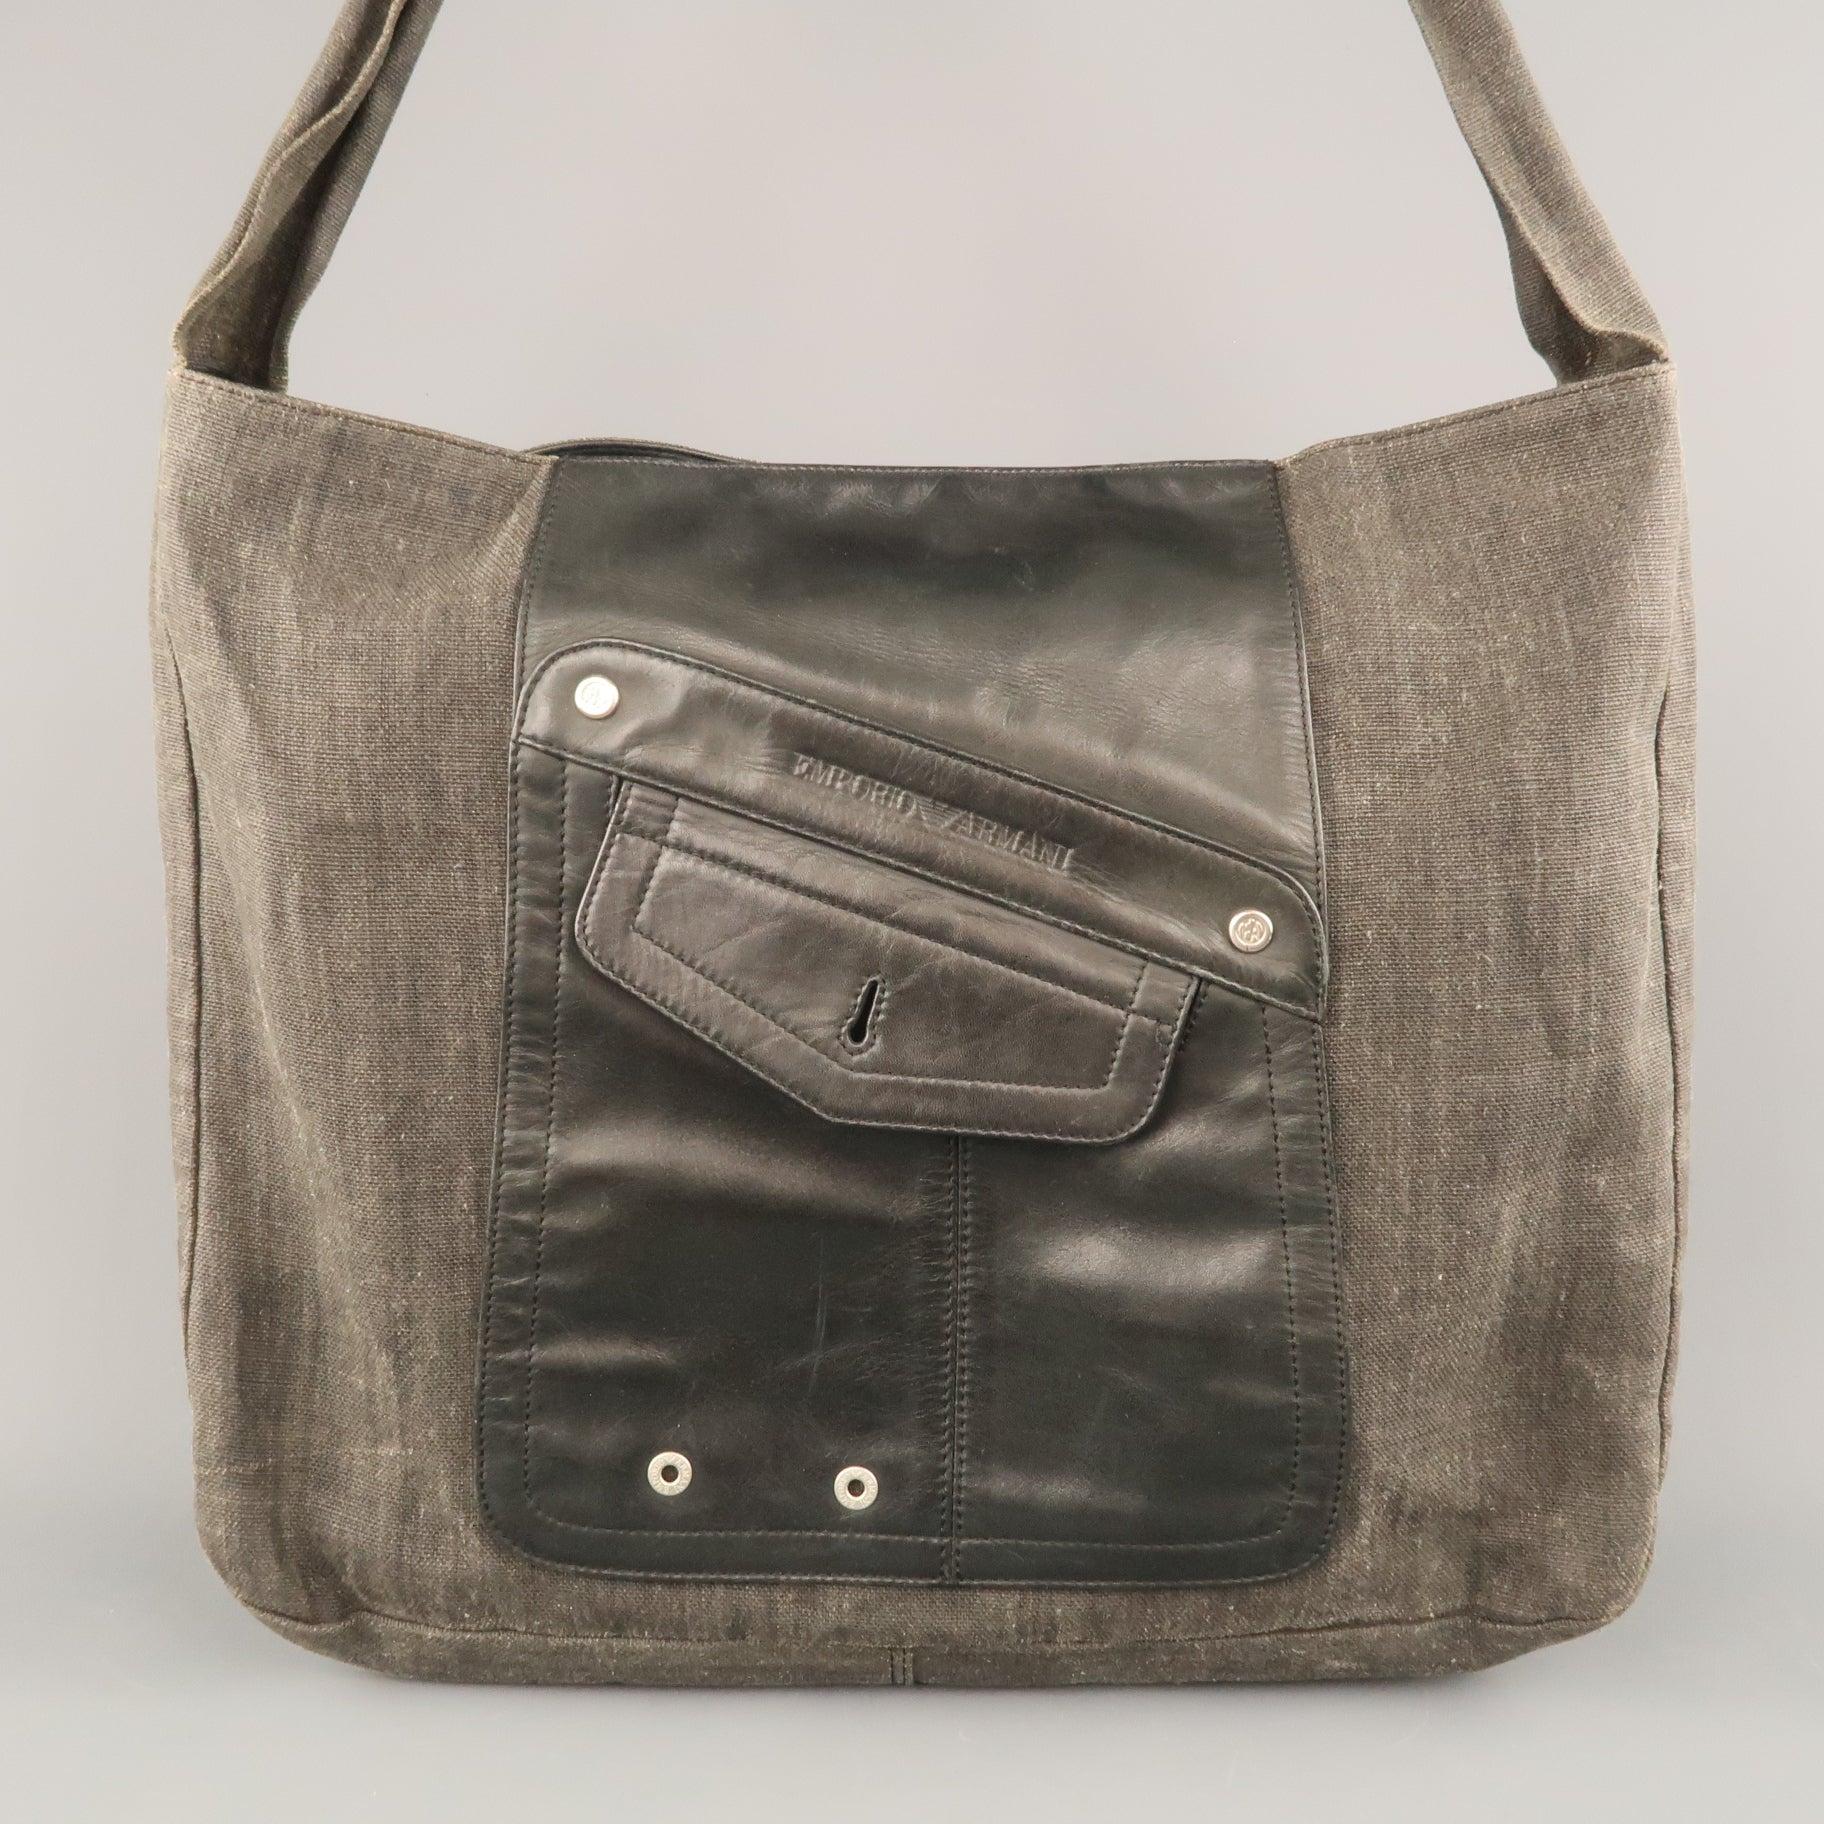 EMPORIO ARMANI oversized tote comes in charcoal coated canvas with a leather patch pocket front, top closure, and shoulder strap with leather stripe. . Made in Italy.Good Pre-Owned Condition.Wear throughout.
 

Measurements: 
  Length: 17 inches